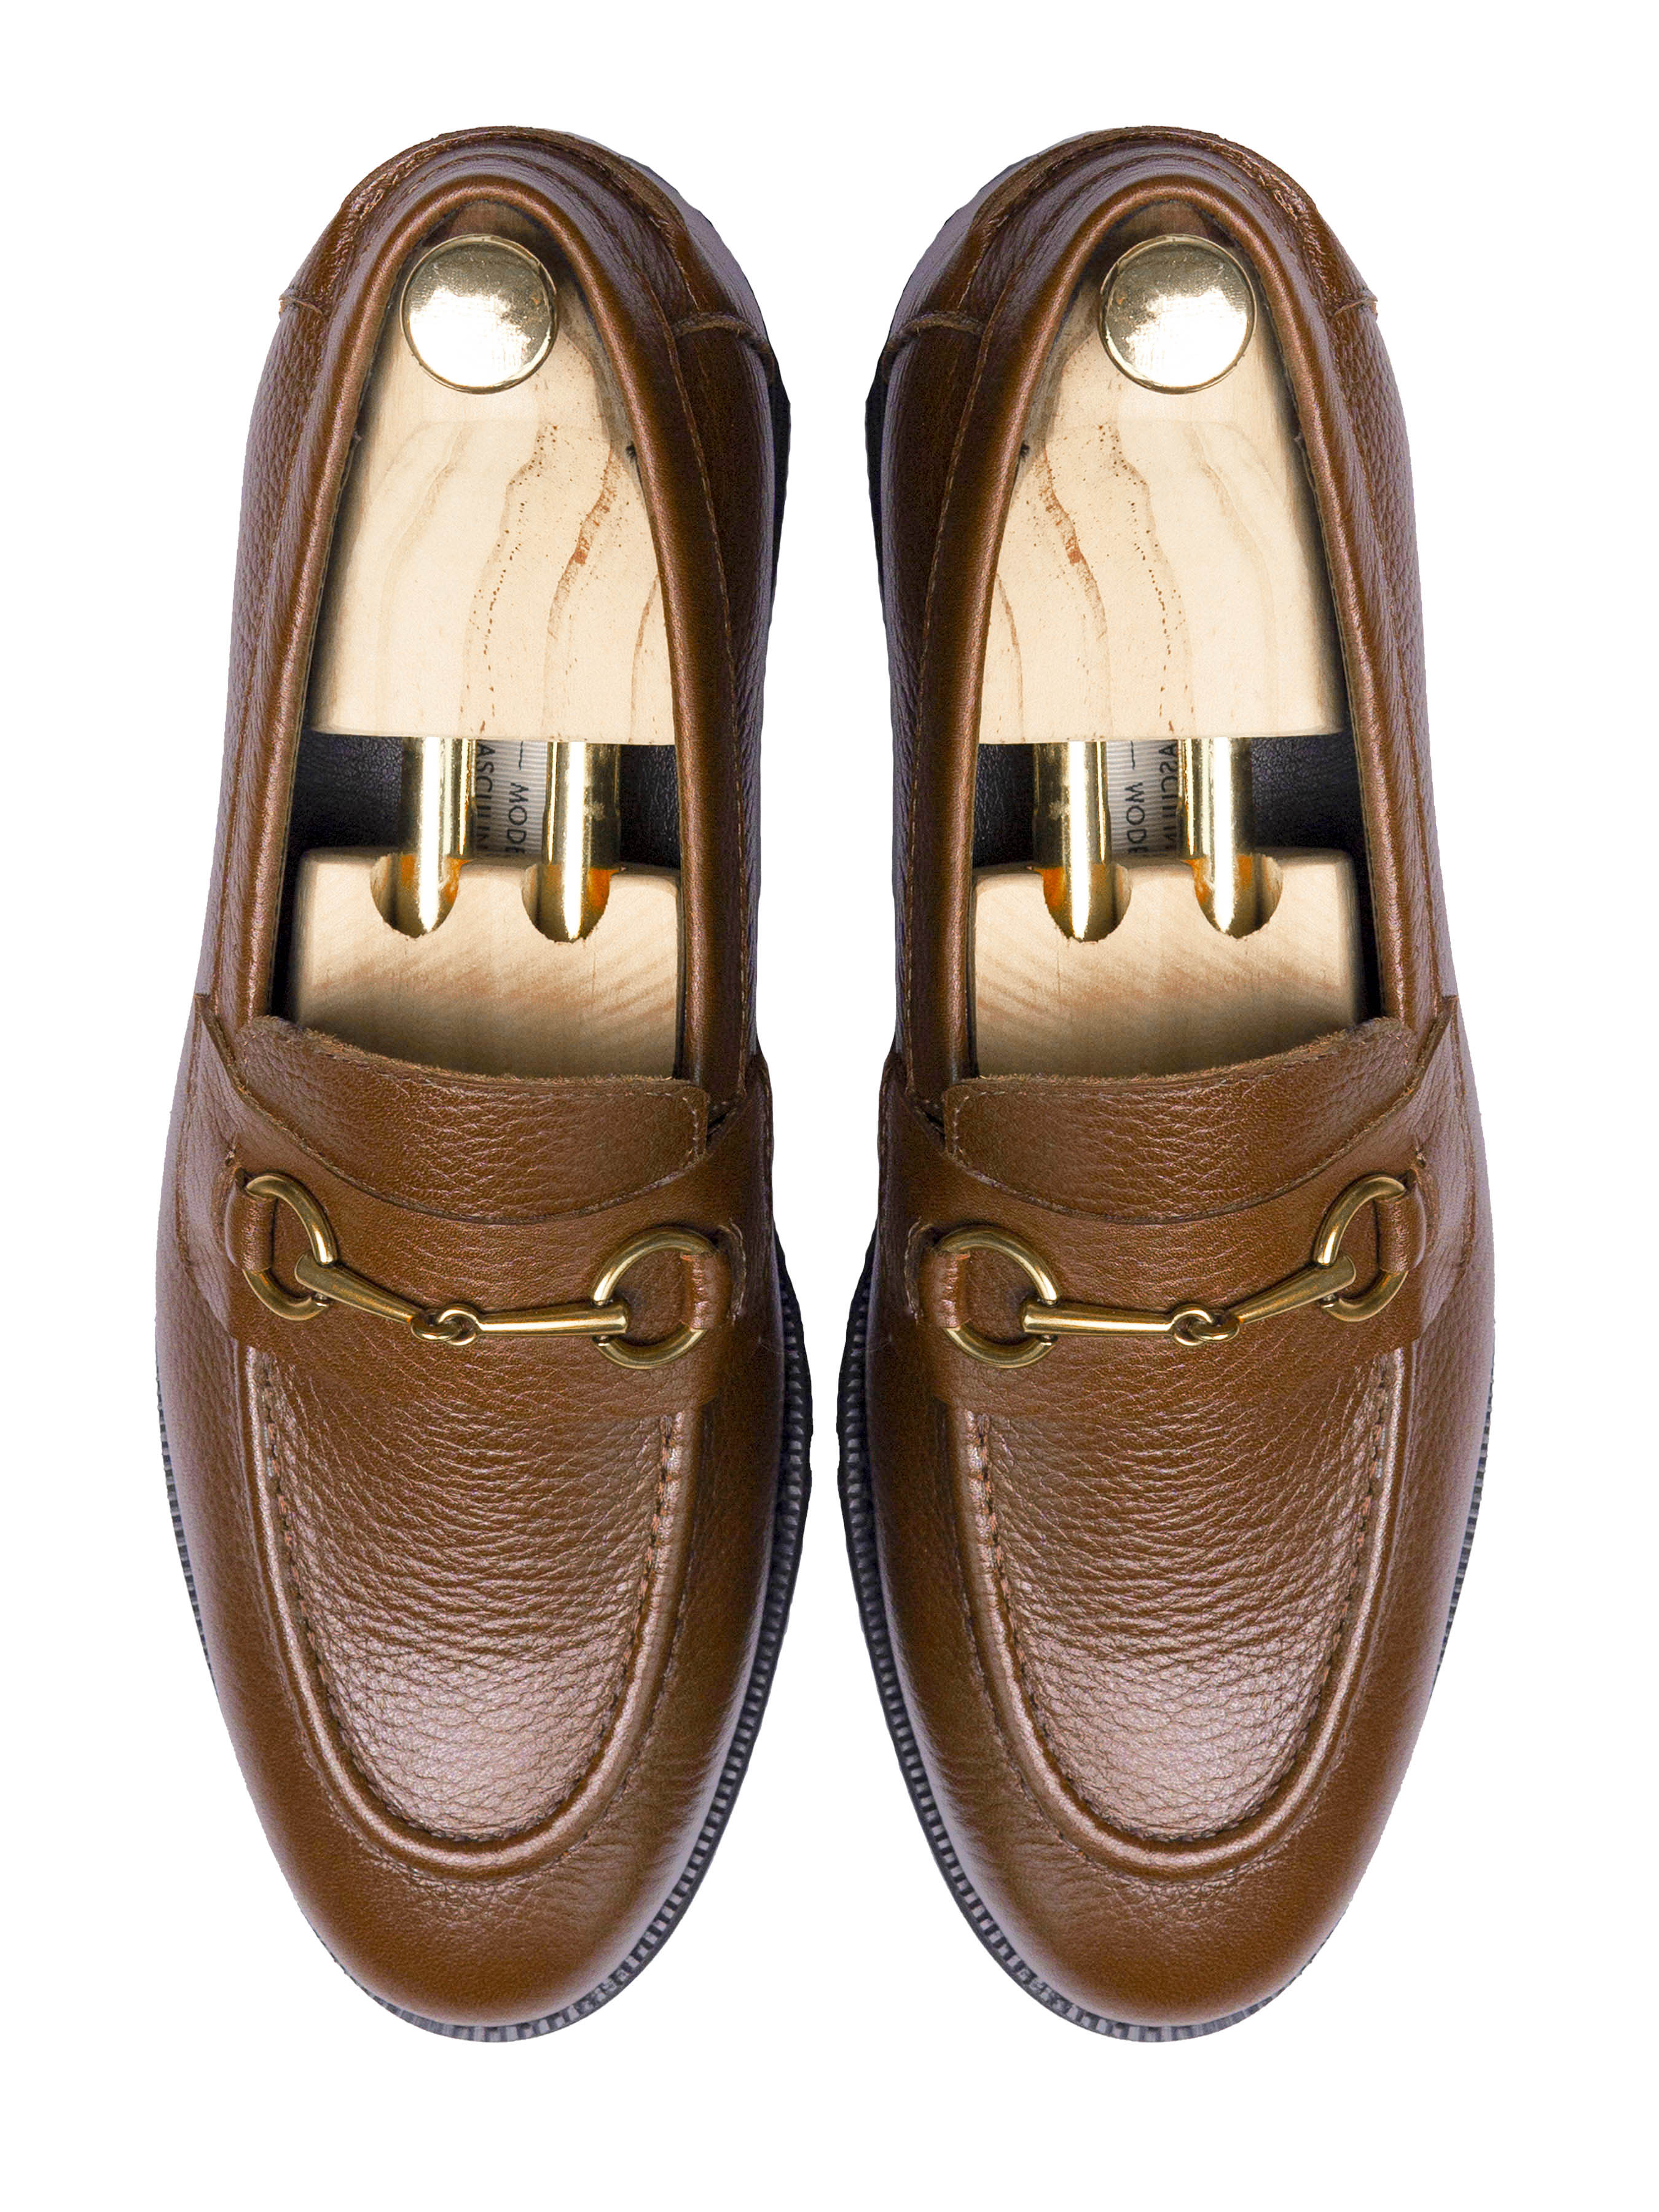 Penny Loafer Horsebit Buckle - Tobacco Brown Pebble Grain Leather (Crepe Sole) - Zeve Shoes